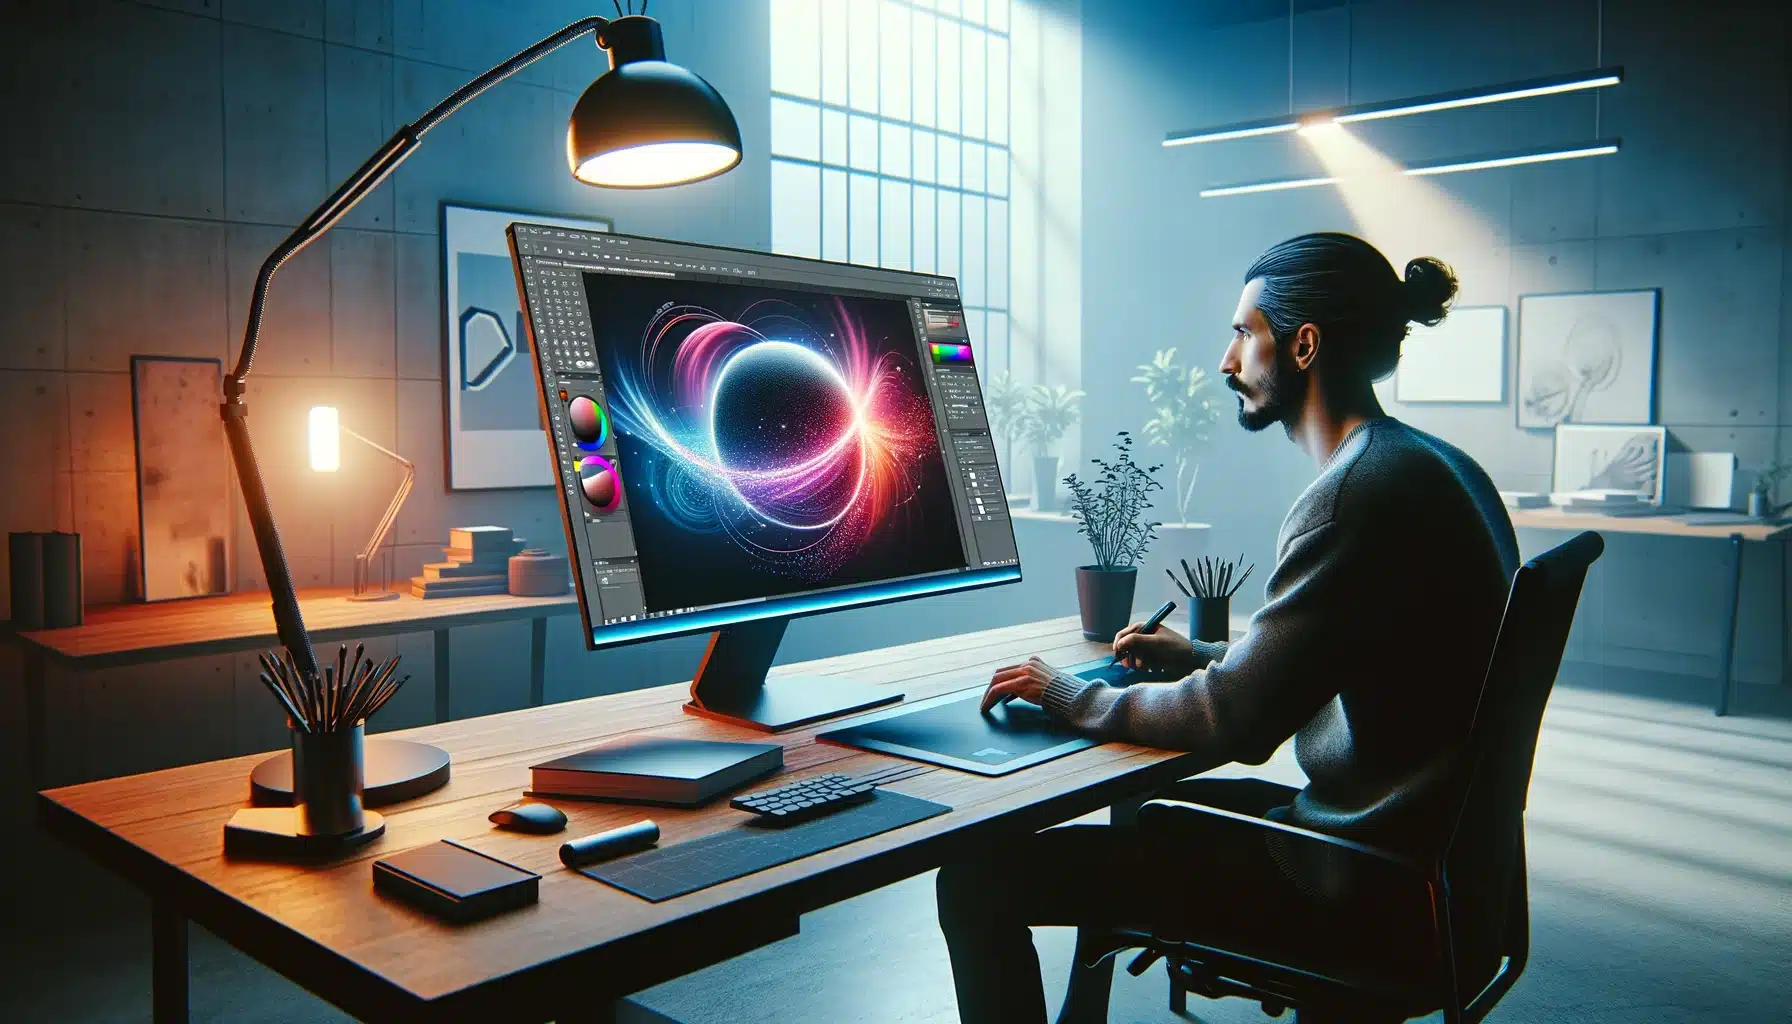 Graphic designer mastering creative techniques in Photoshop within a modern workspace setup."